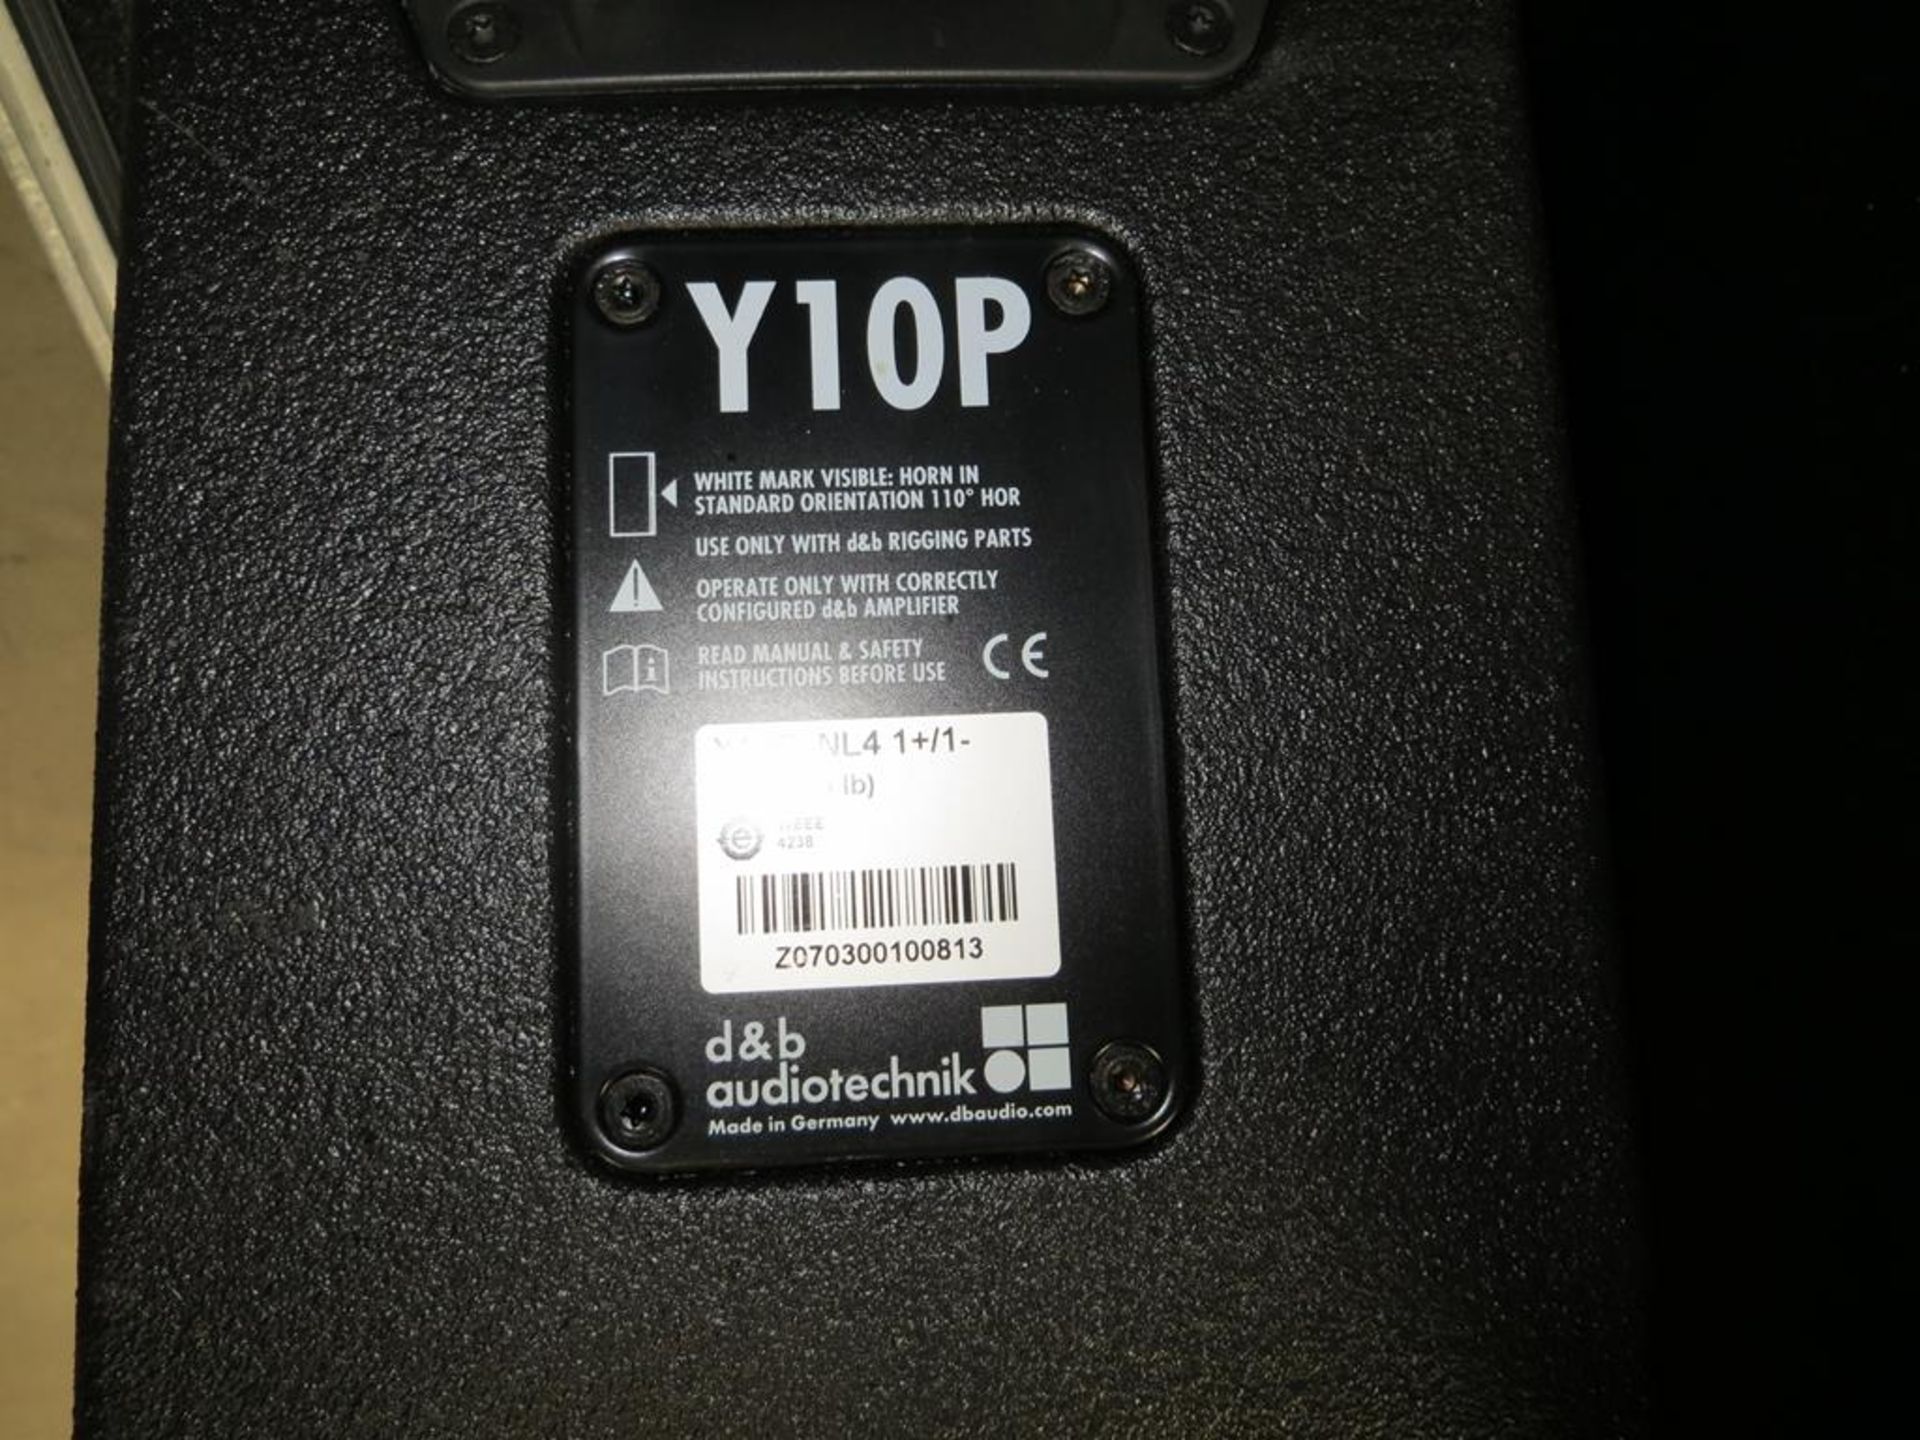 1x No. pair D&B Audio Technik, Y10P with hanging b - Image 4 of 5